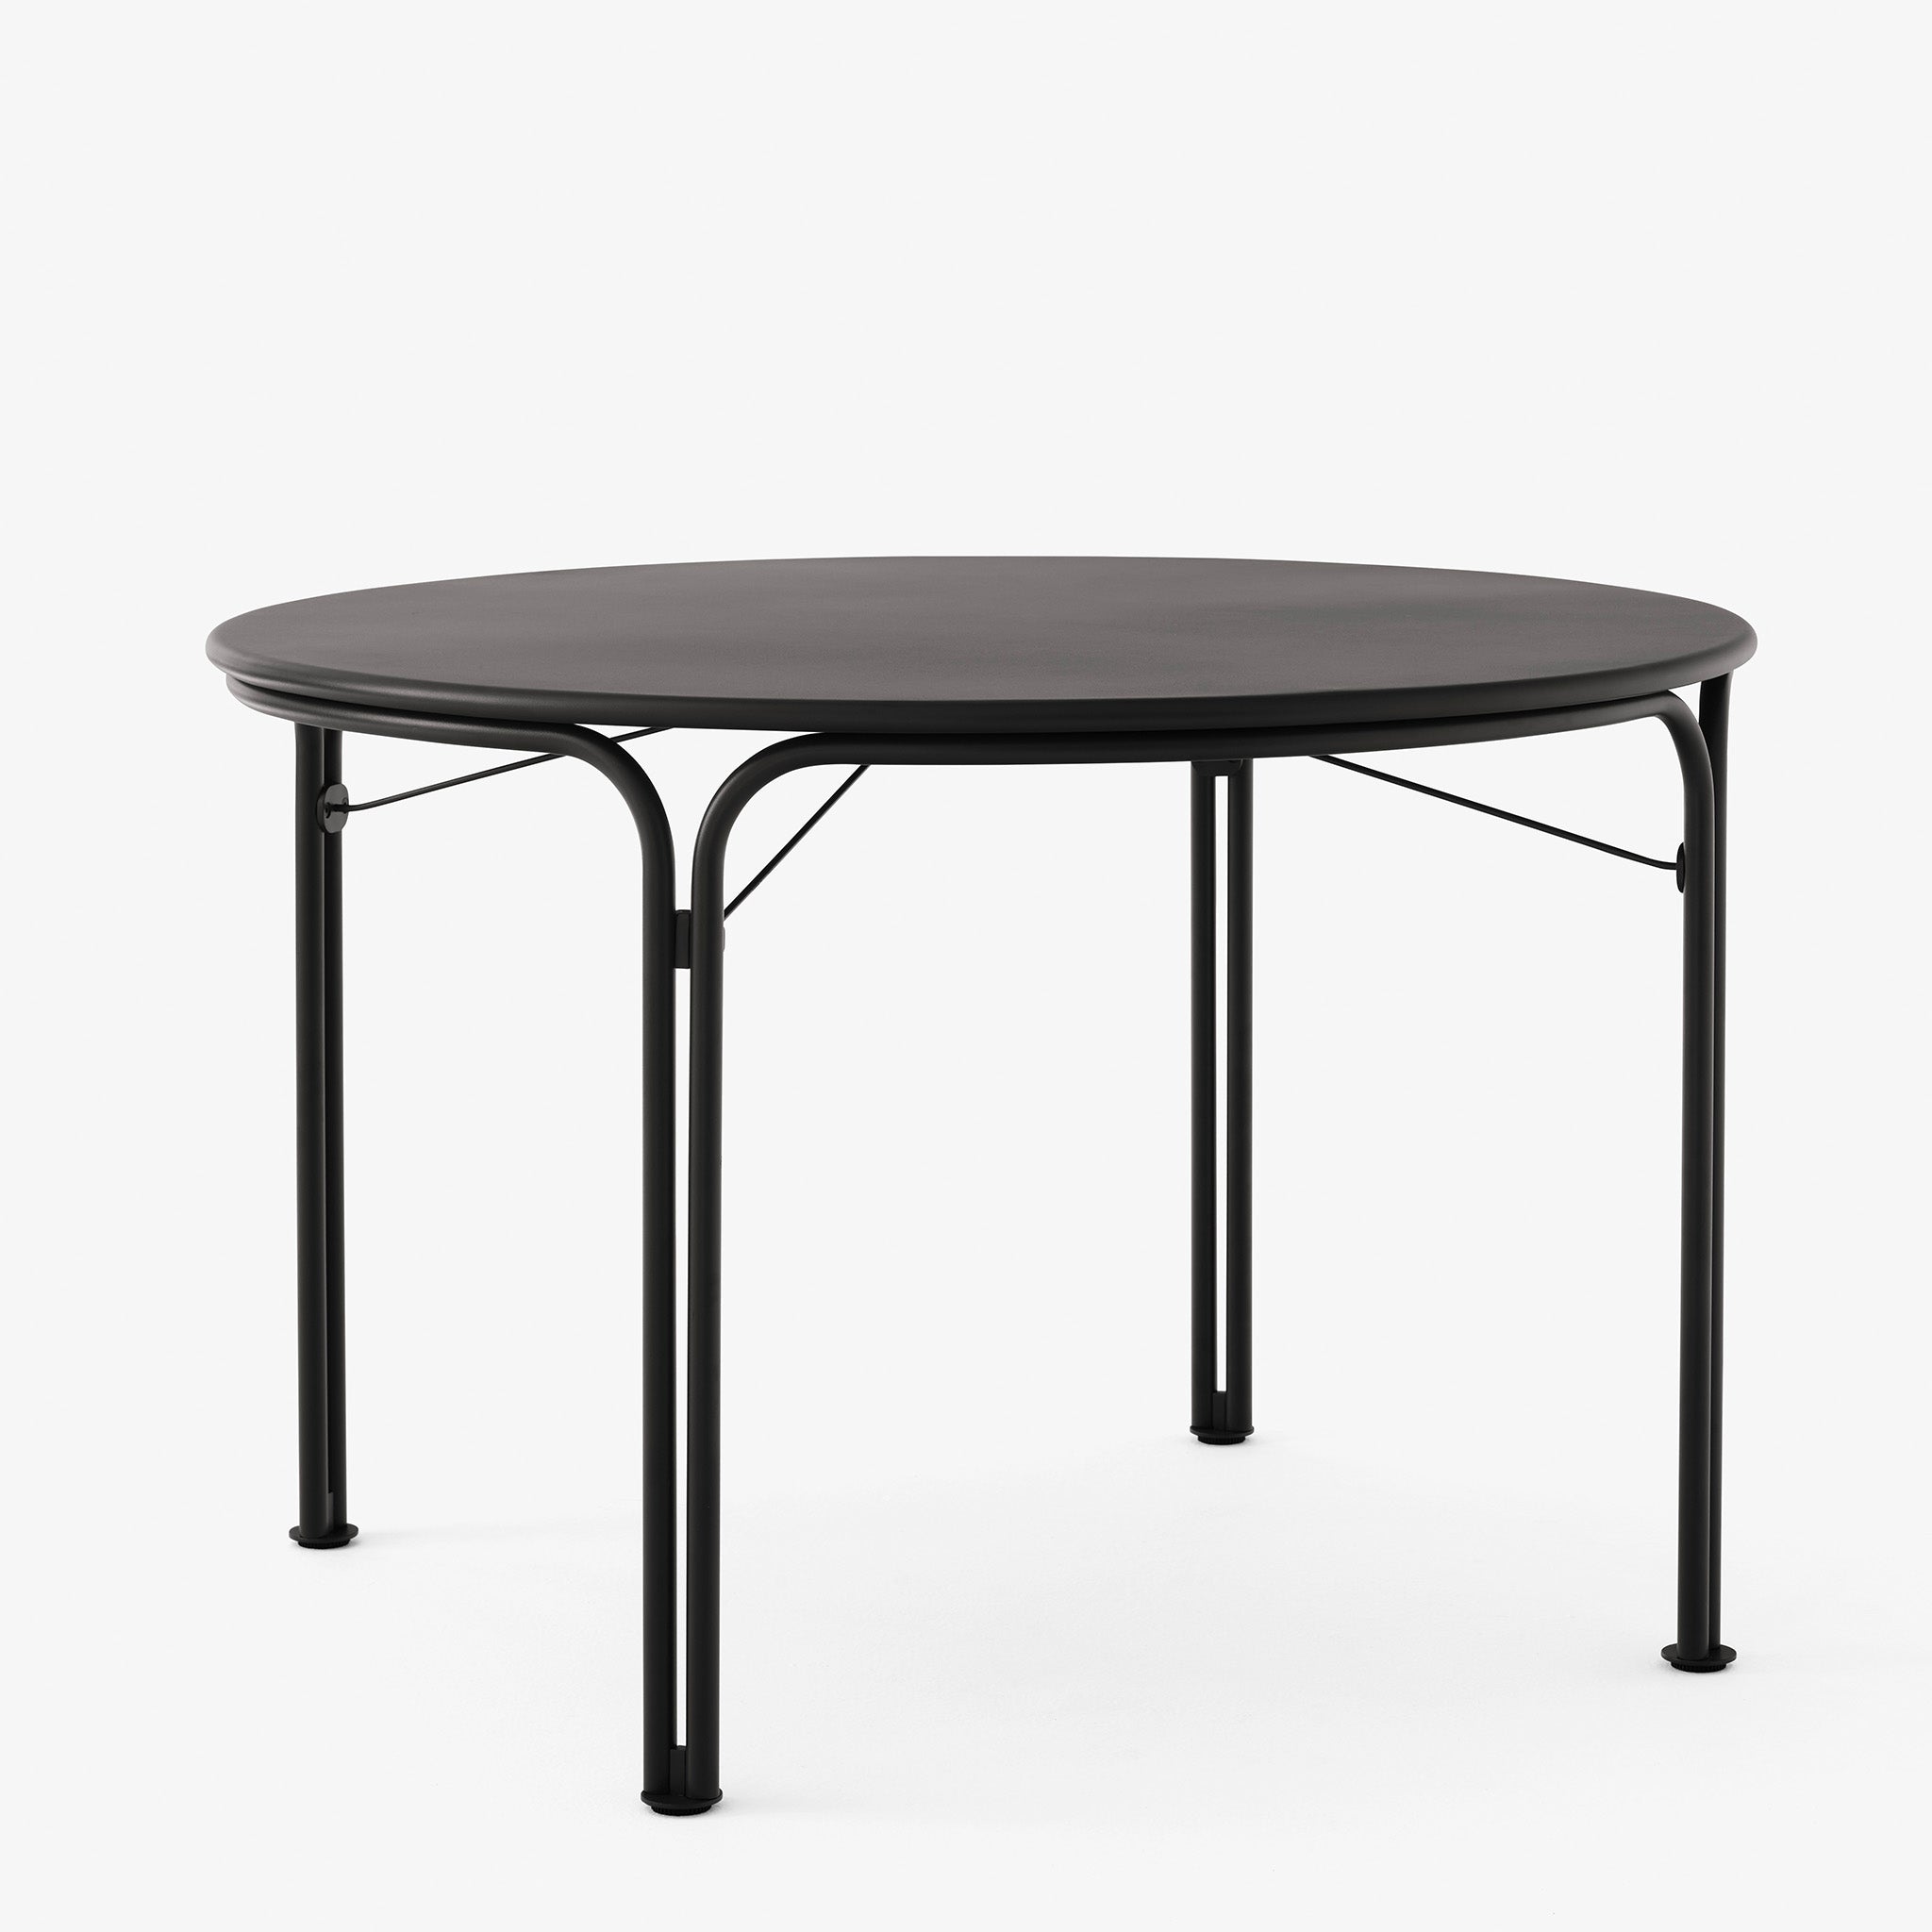 Thorvald SC98 Dining Table Round Ø115 by Space Copenhagen